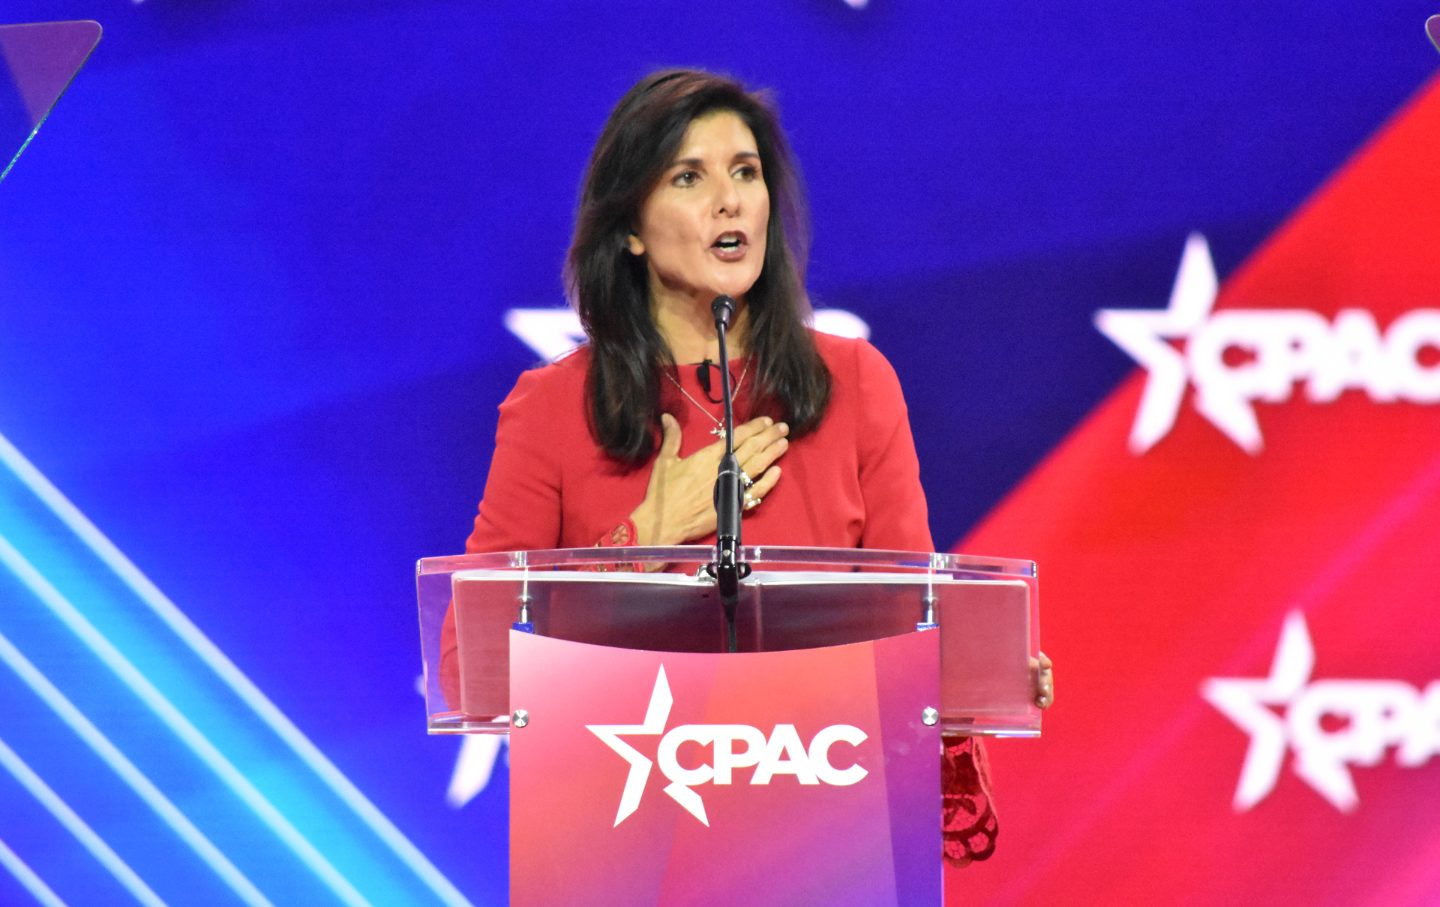 Nikki Haley, who has announced her candidacy for the 2024 Republican presidential nomination, speaking a CPAC on March 3, 2023, in National Harbor, Md.